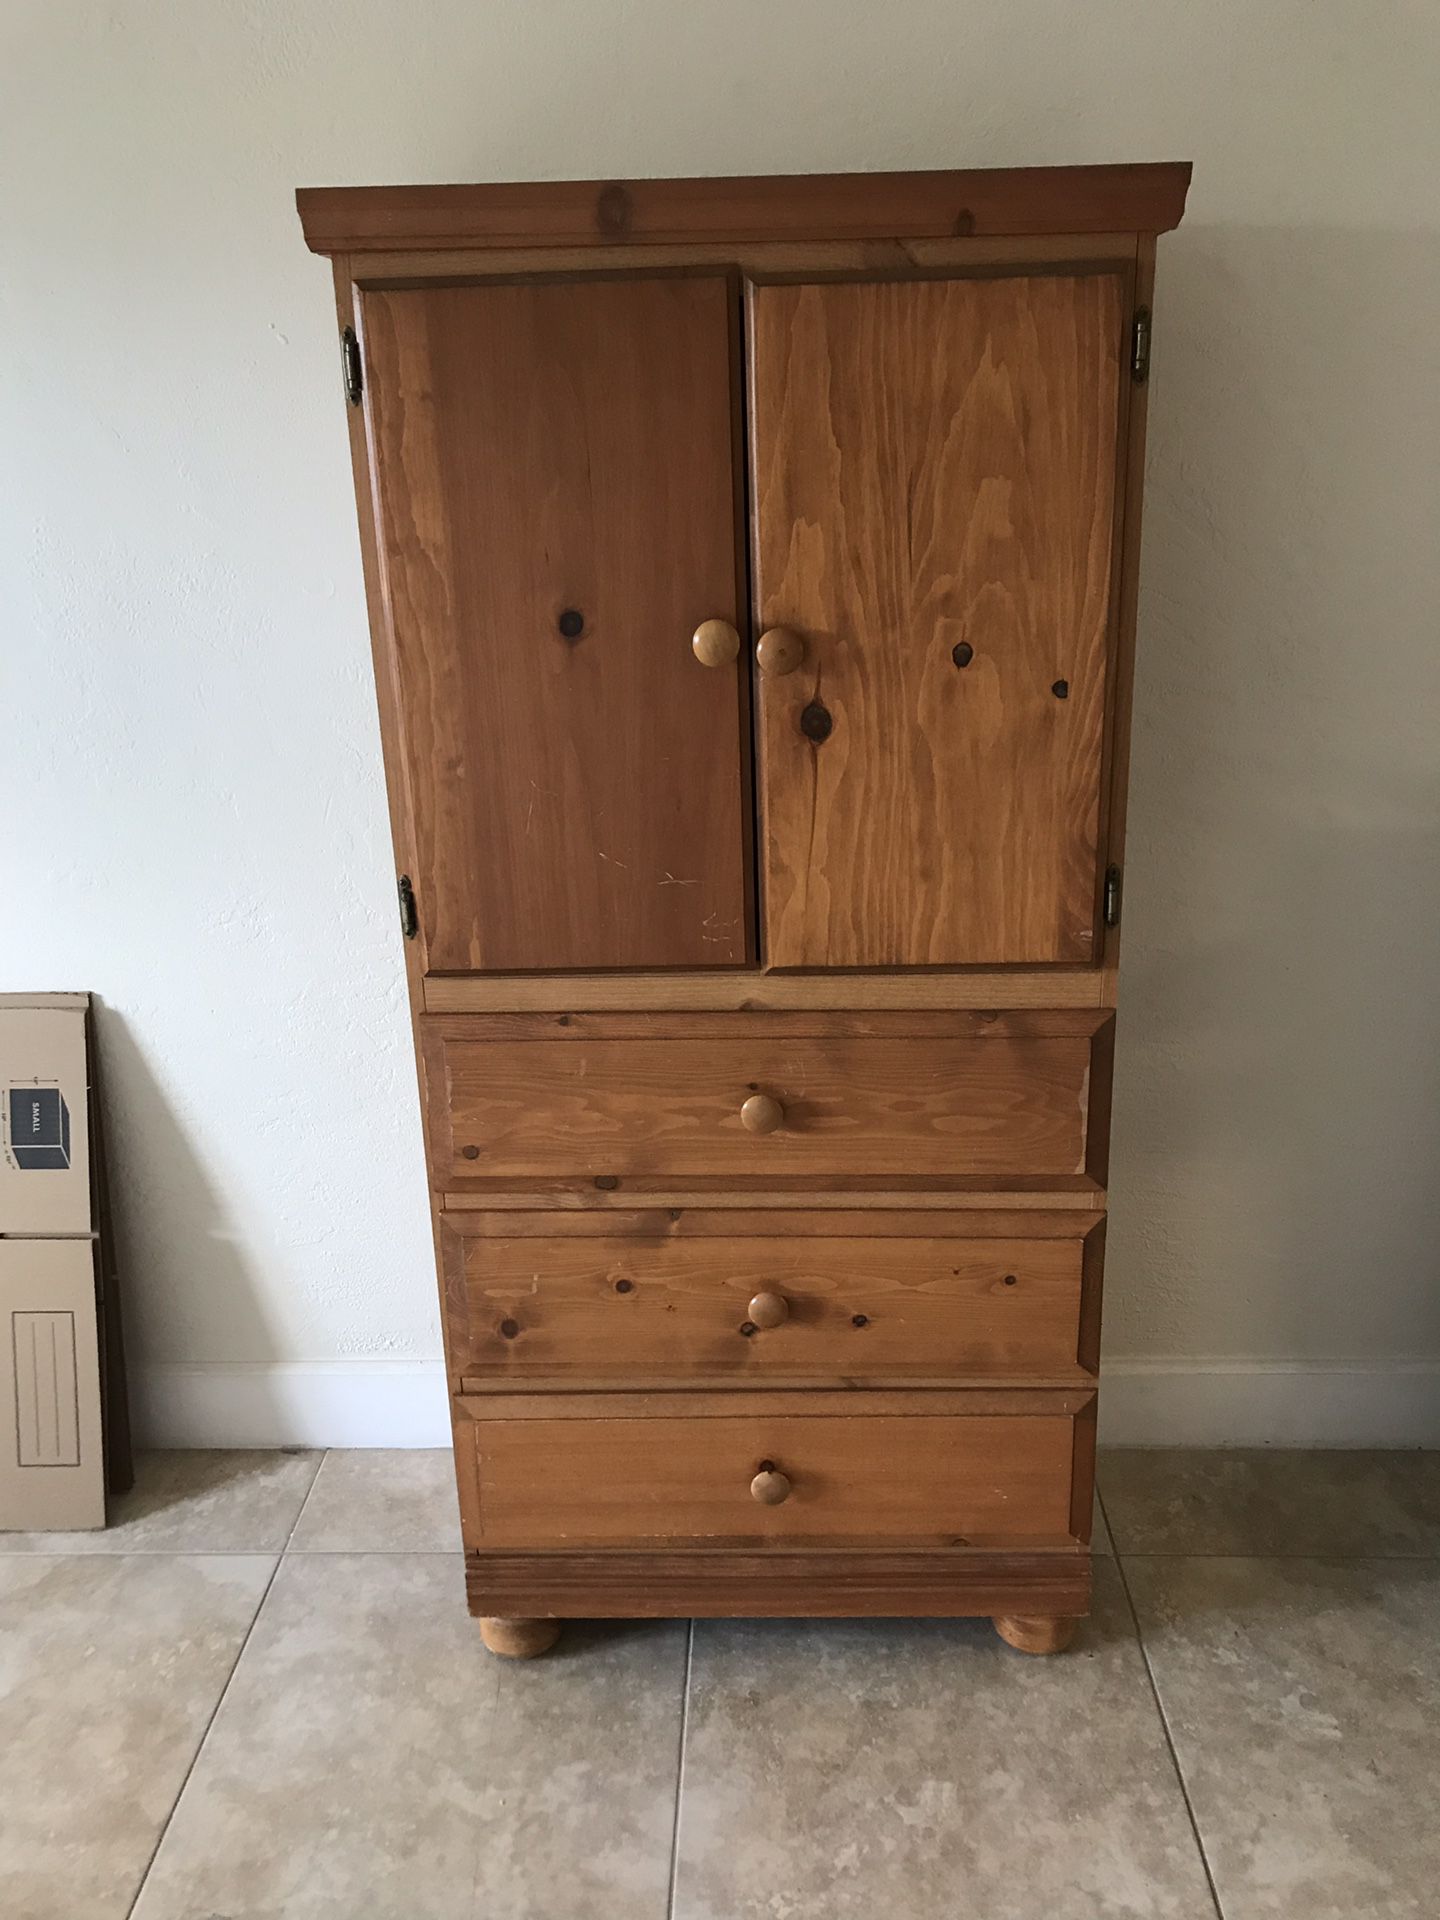 Tall light wood dresser with two shelves & three drawers.